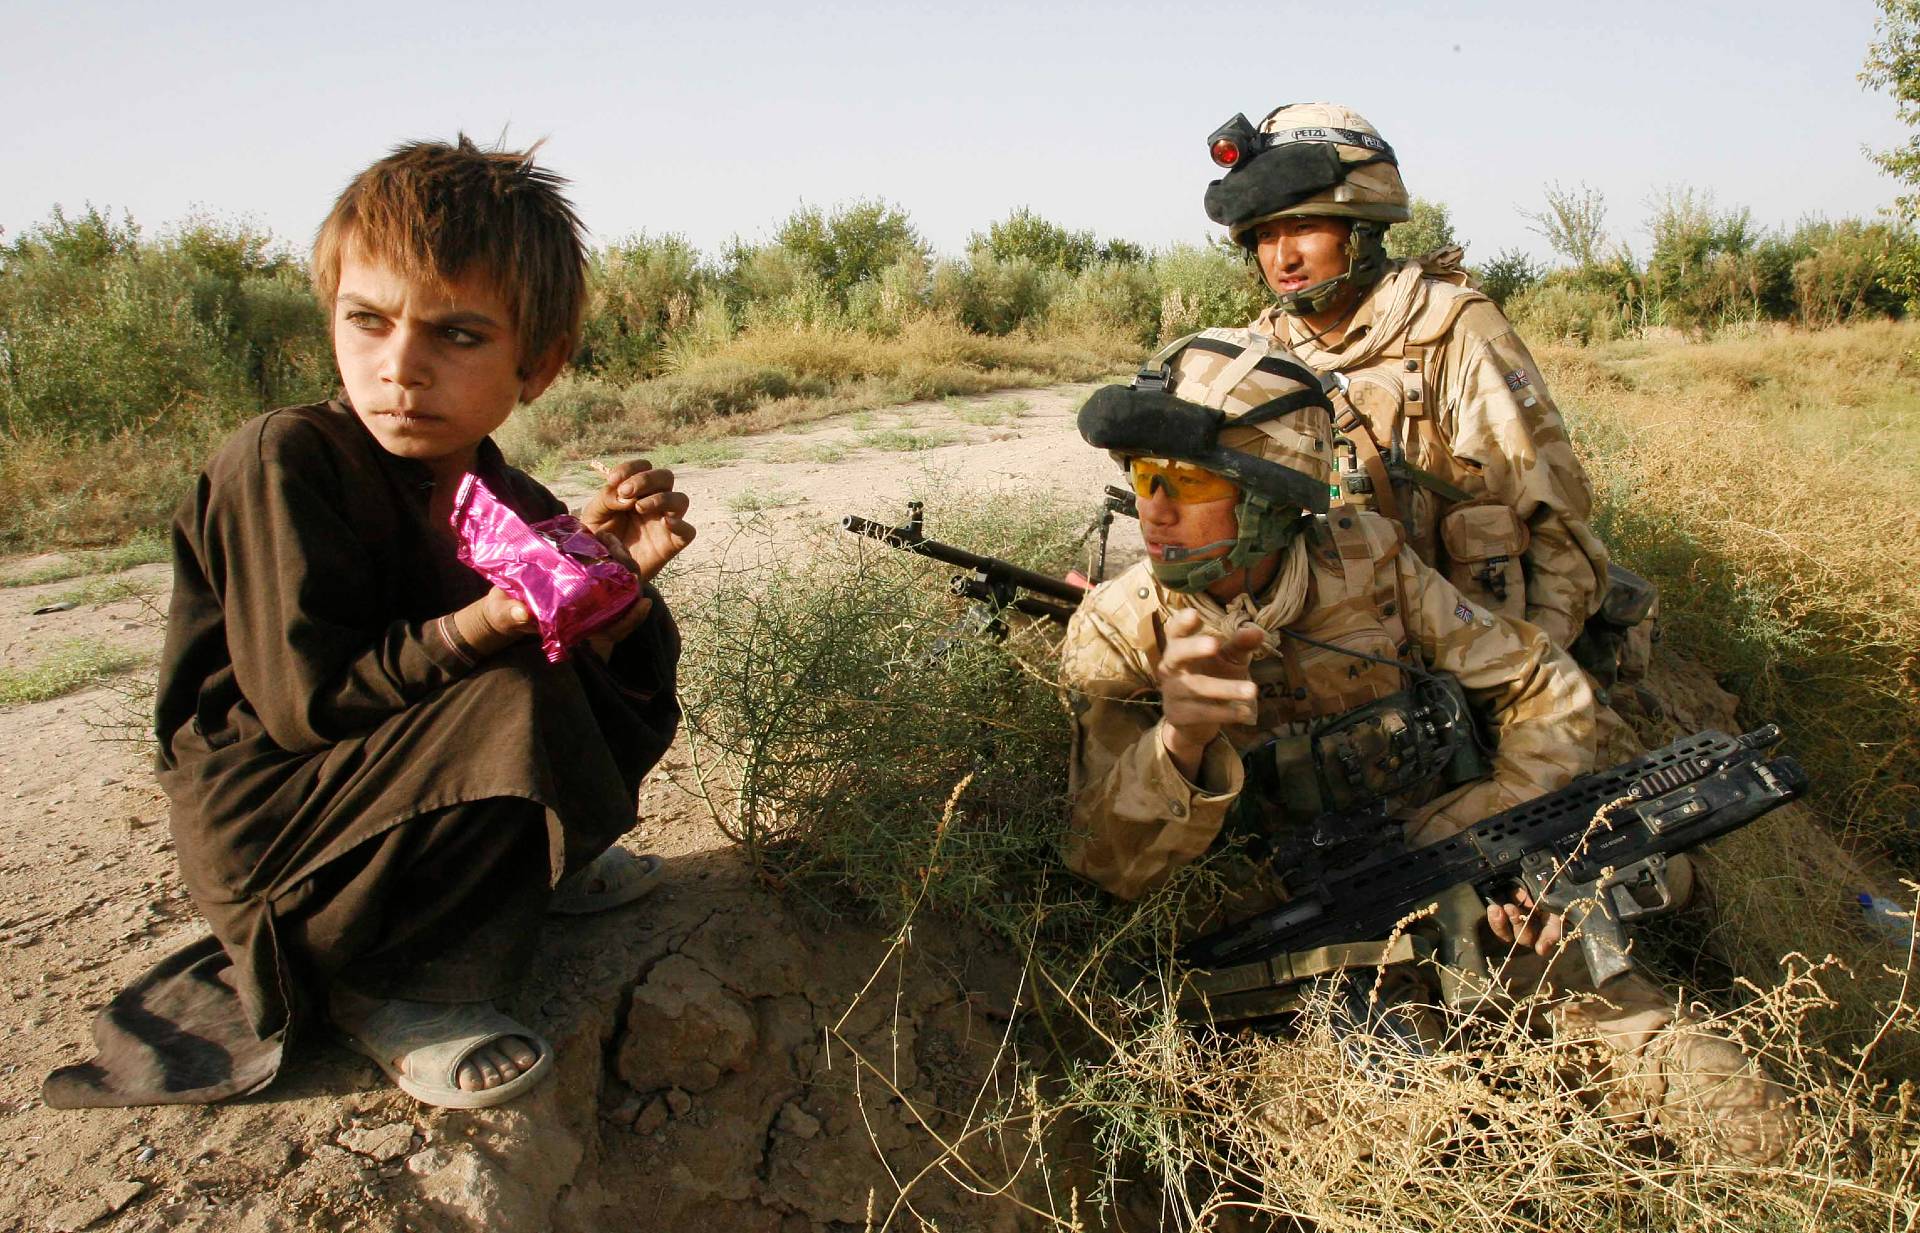 Esmat Mohammed, seven, with British Army Ghurka soldiers in Helmand province in September 2007 (Peter Nicholls/The Times)